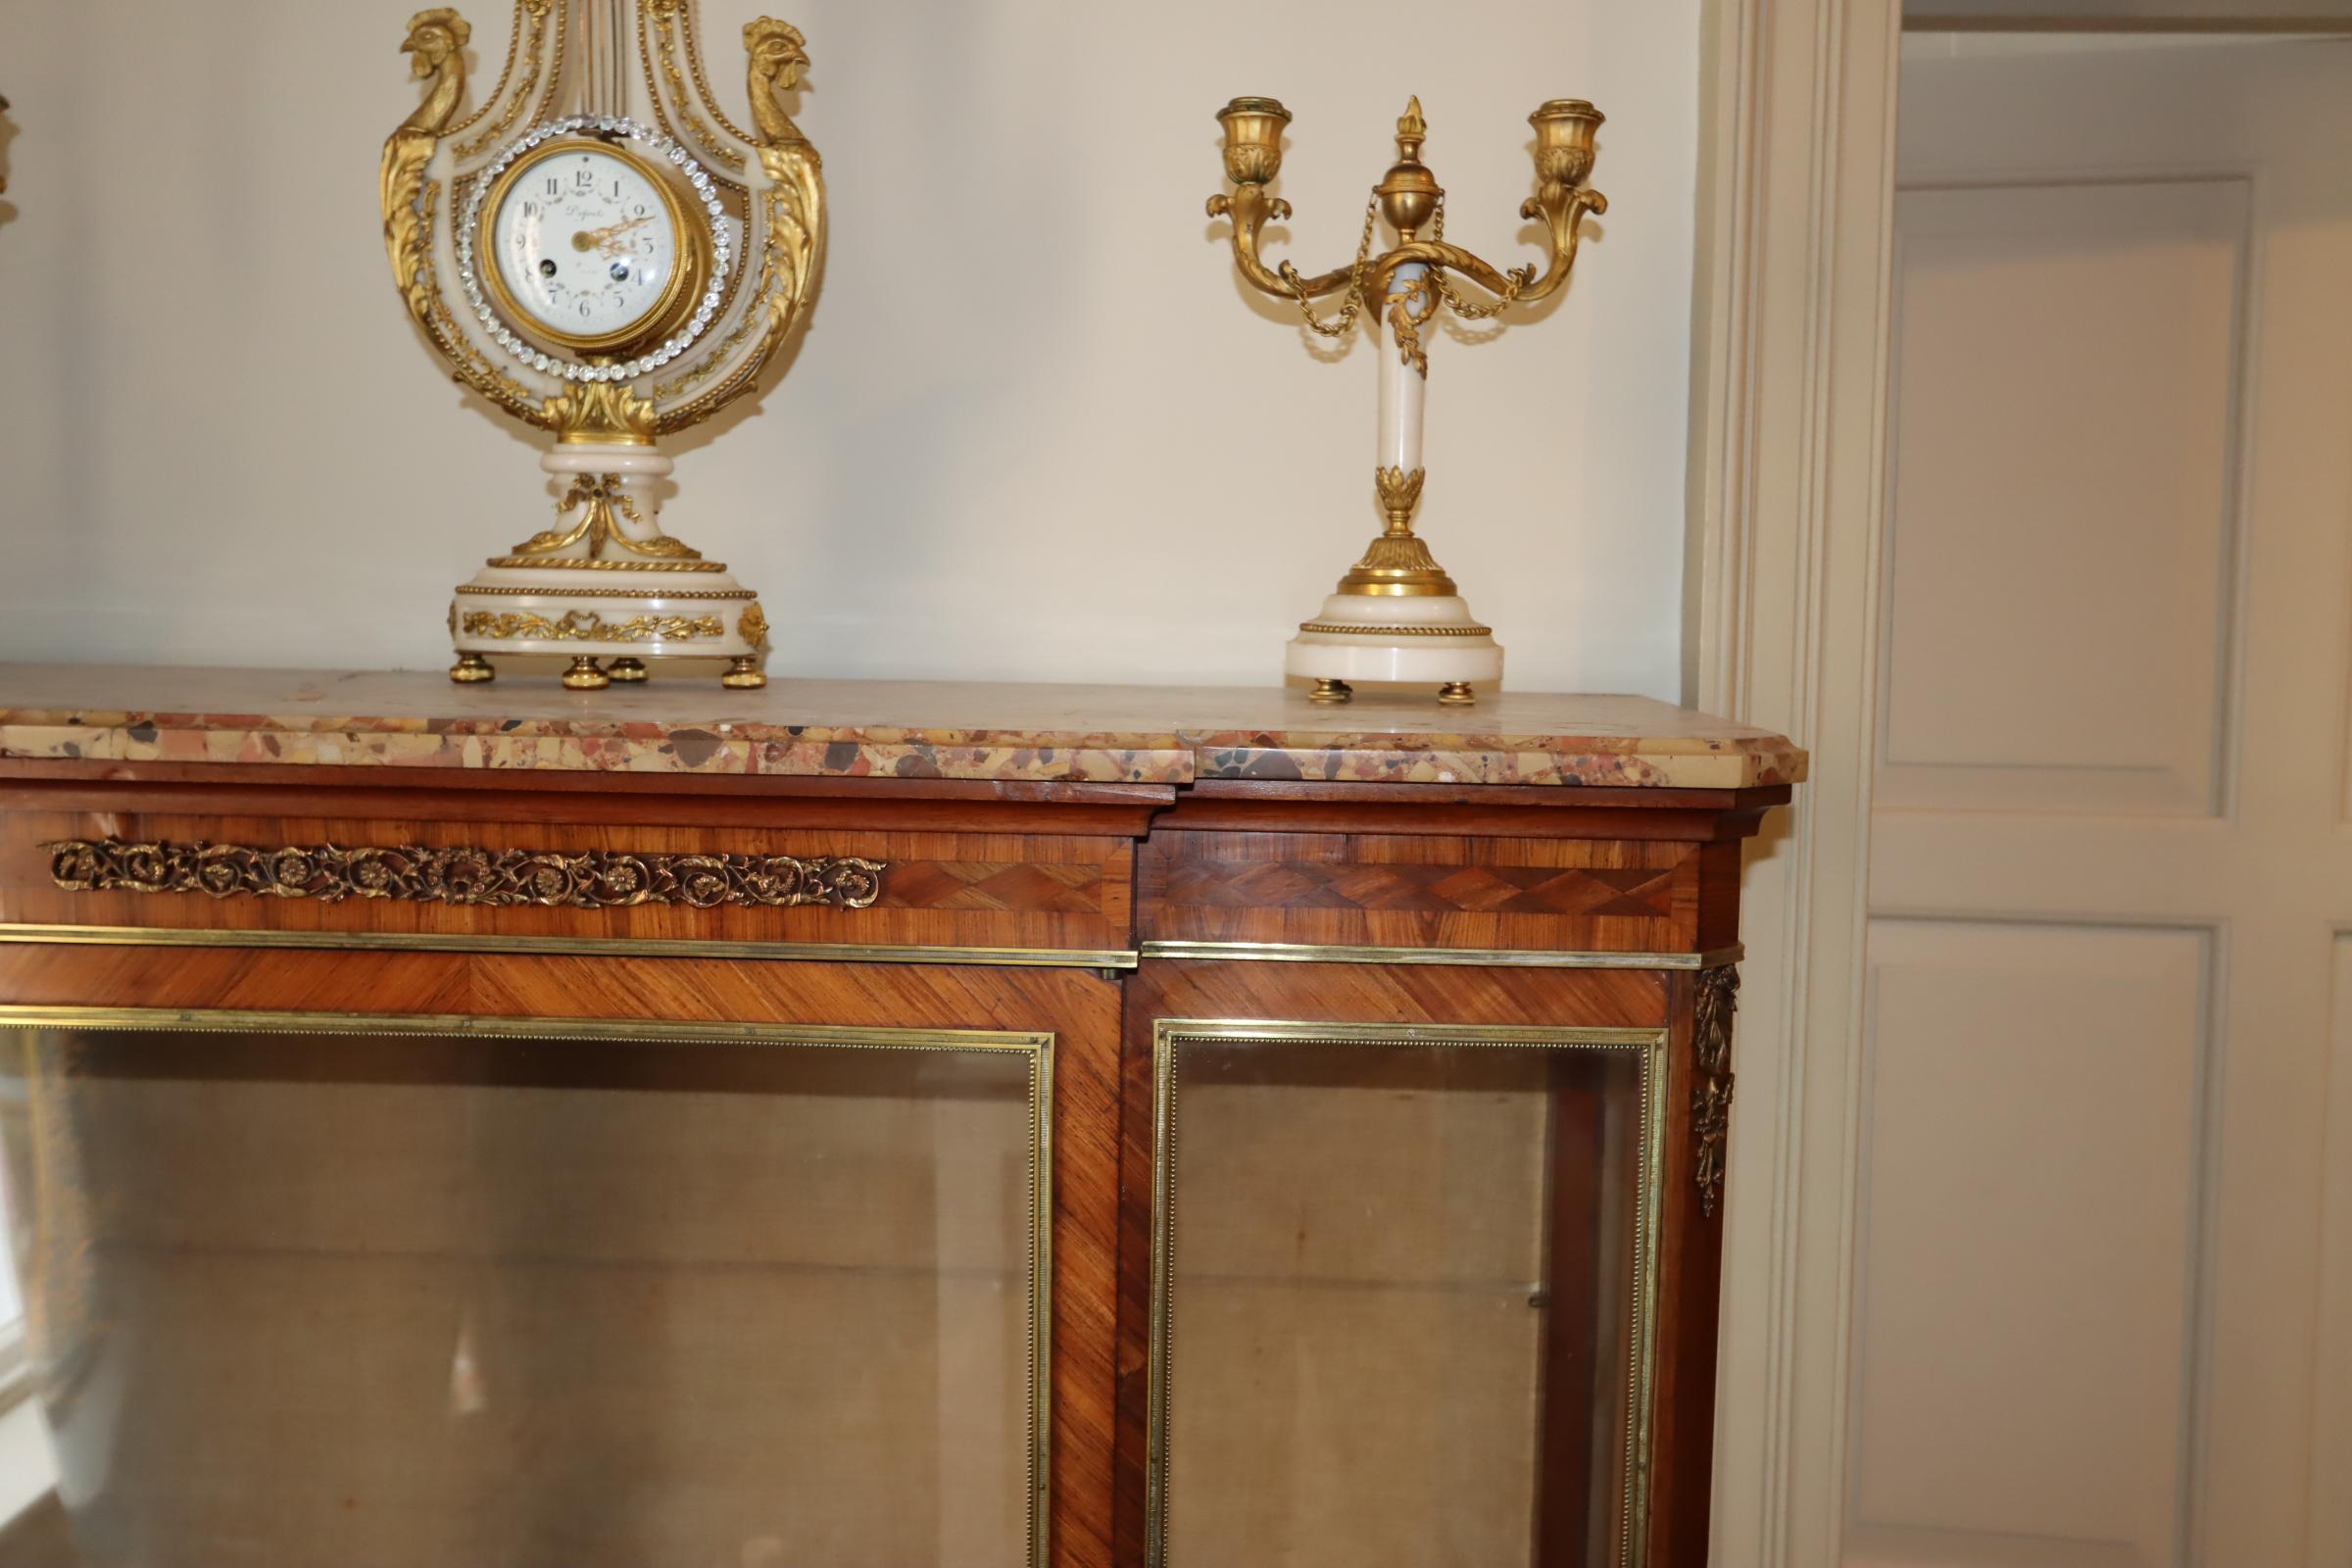 Exemplifying the exquisite artistry of turn-of-the-century French design, this captivating display vitrine, crafted around 1900, showcases the harmonious blend of kingwood and lavish ormolu mounts. The rich tones of kingwood veneer create a warm